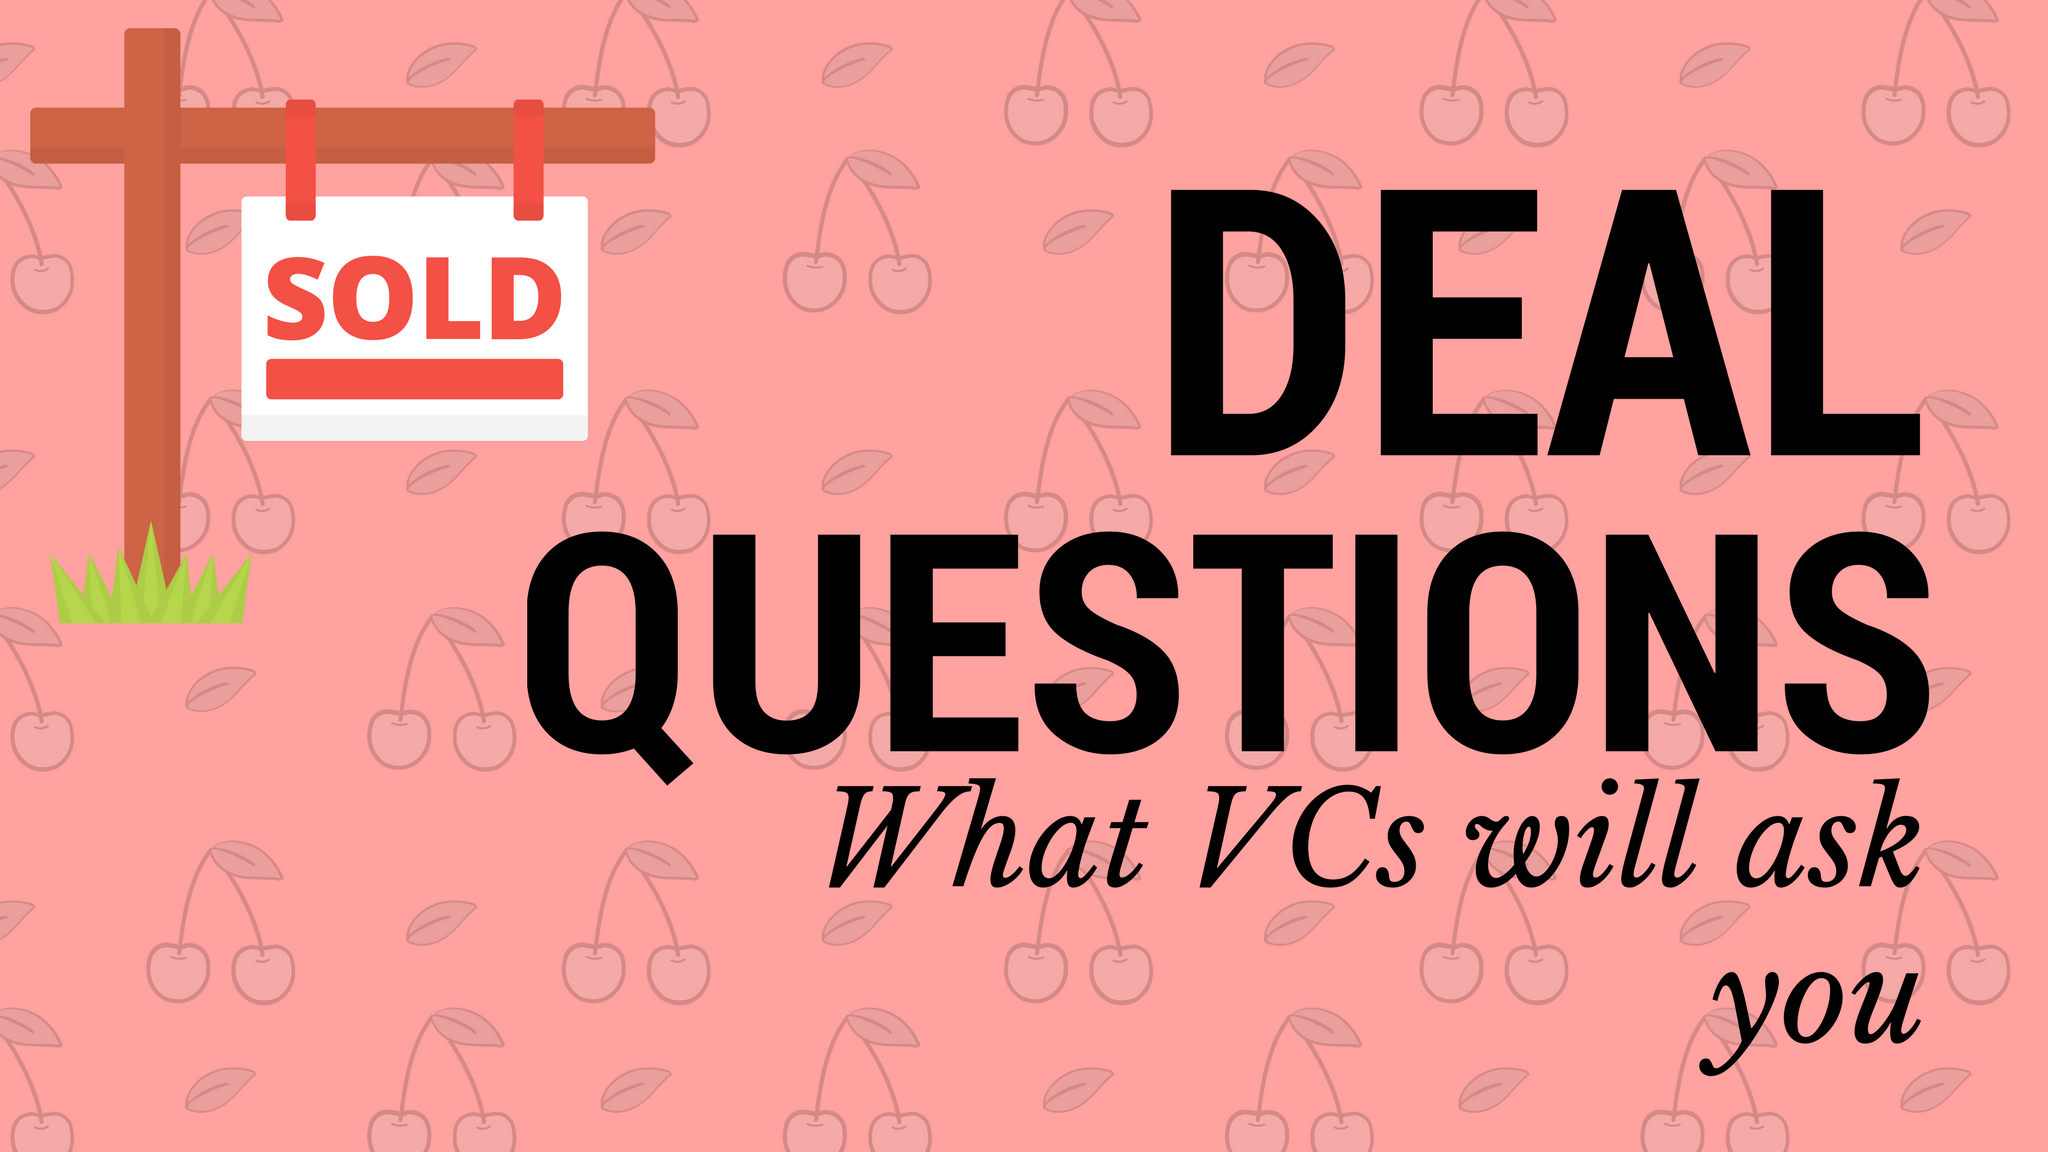 Fundraising questions for venture capital startups